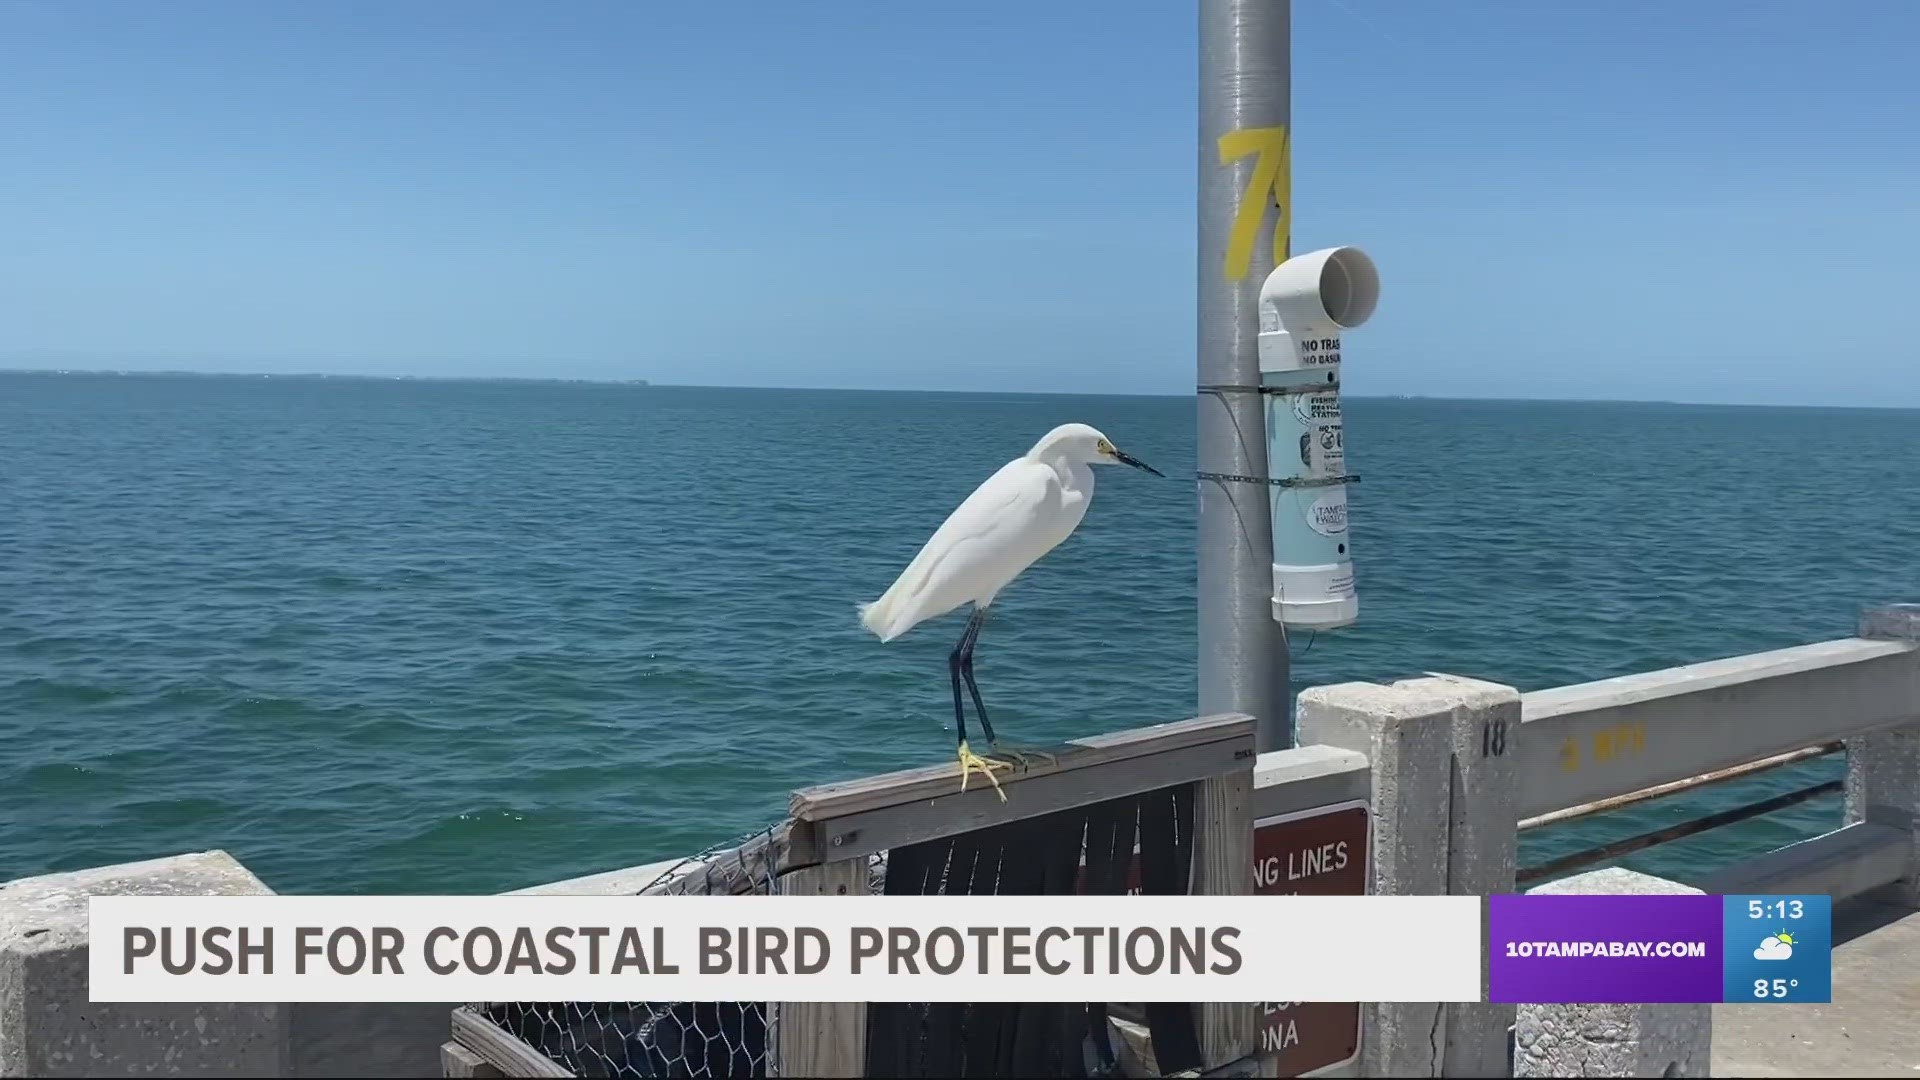 According to Friends of the Pelicans, more than 1,000 seabirds were rescued from the Skyway Fishing Pier last year.